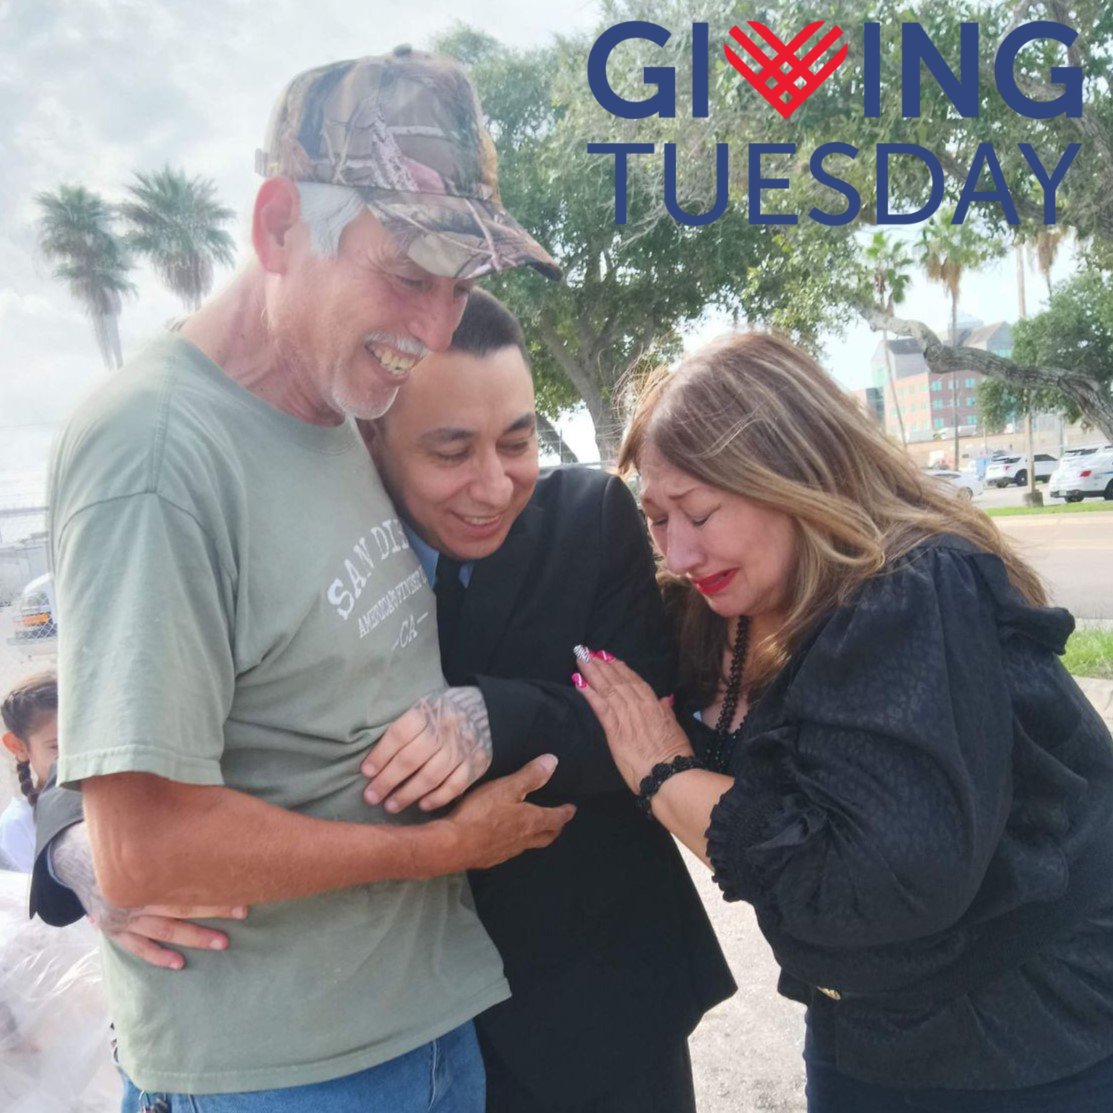 This #GivingTuesday, we celebrate IPTX client Joe David Padron being home after 21 years in prison. Make a gift today to help free the innocent. Media company @audiochuck, creators of the hit @crimejunkiepod, will match all gifts to IPTX up to $50,000! bit.ly/iptxdonate